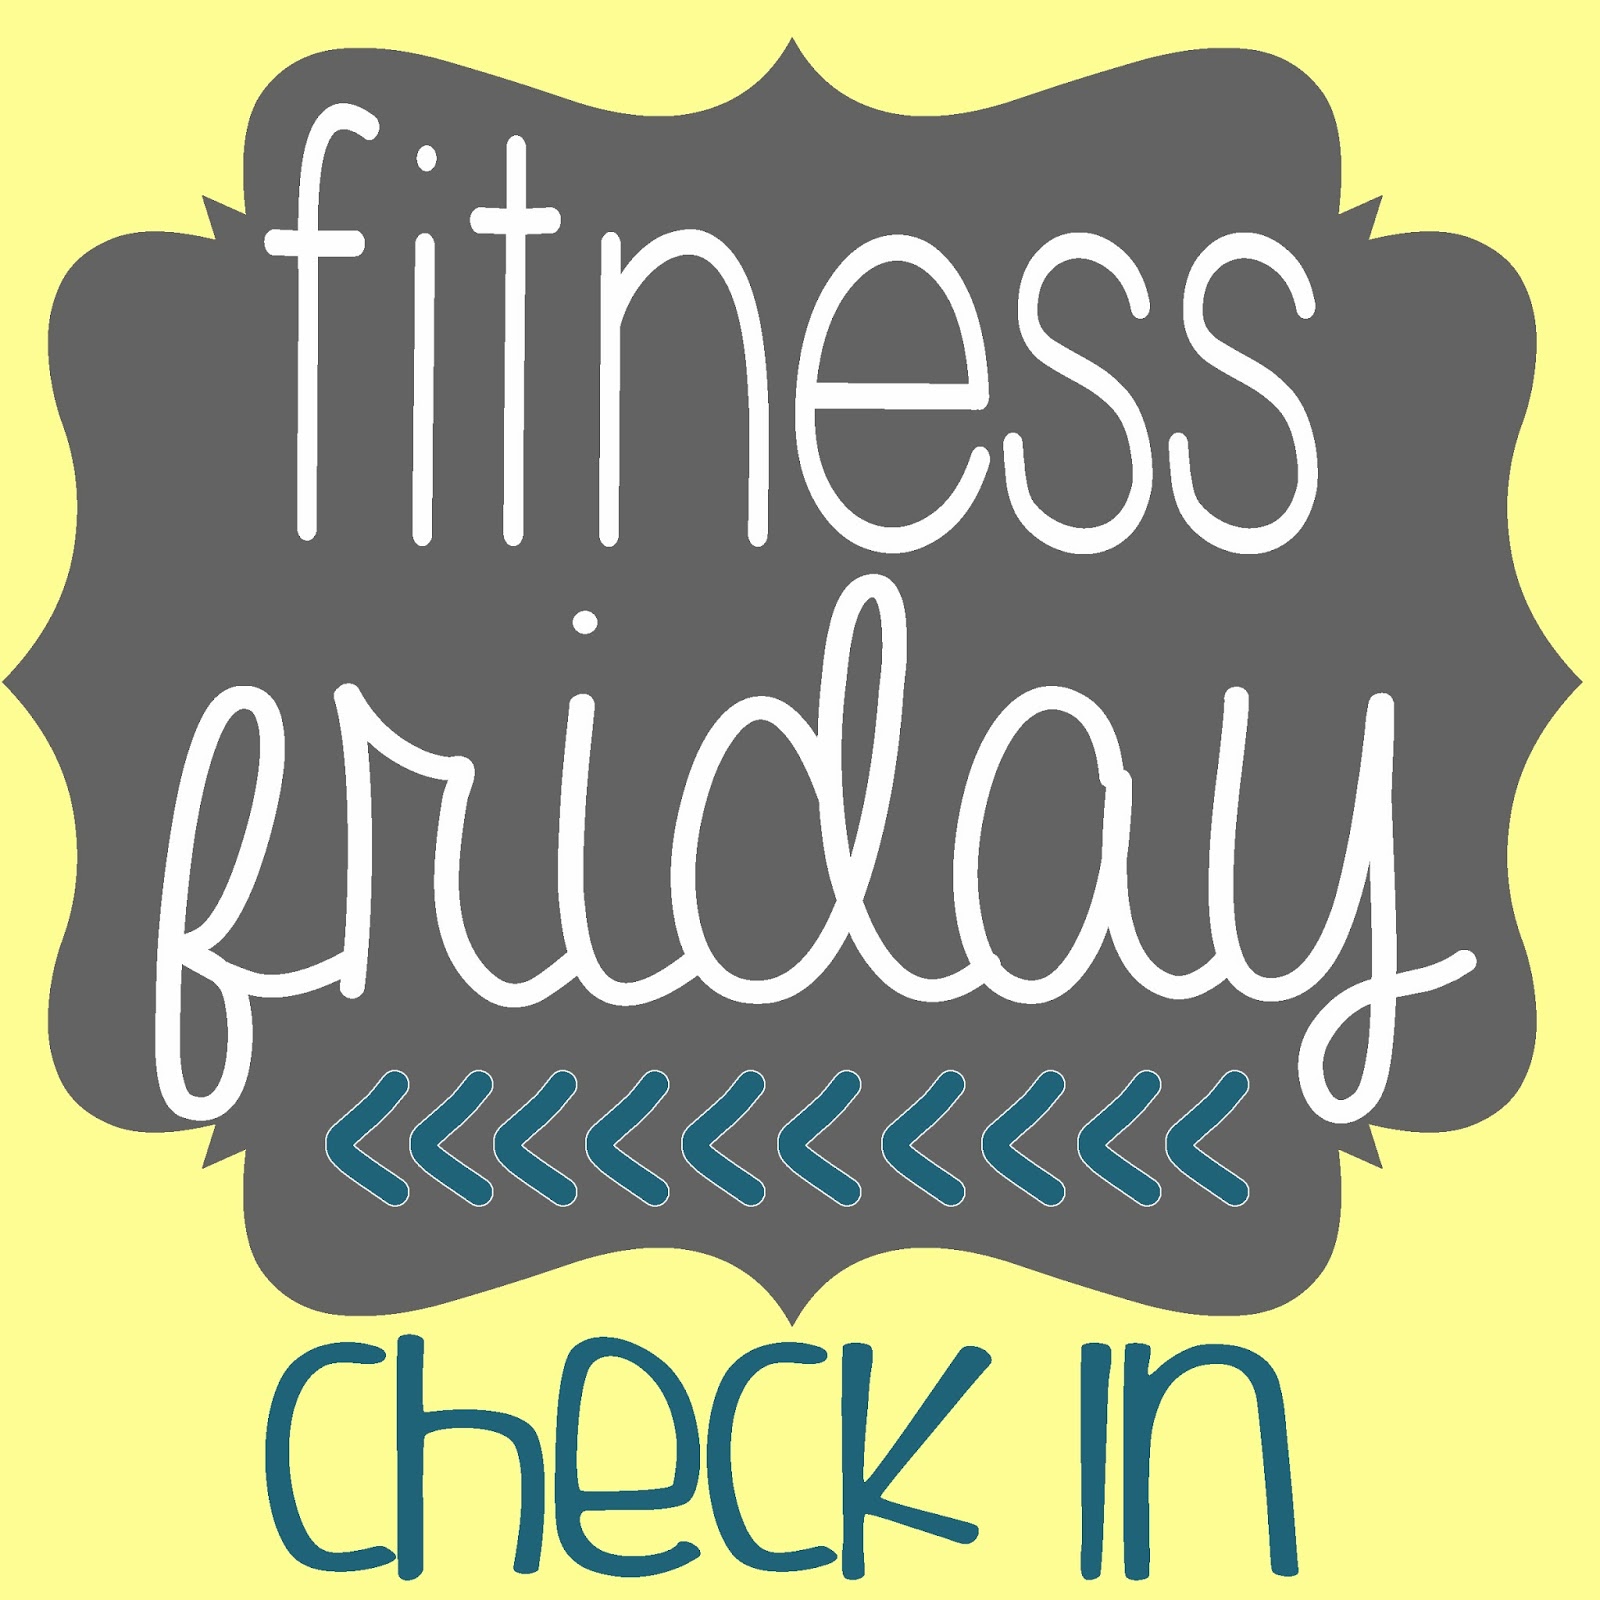 Simple Friday Motivational Quotes For Workout for Burn Fat fast